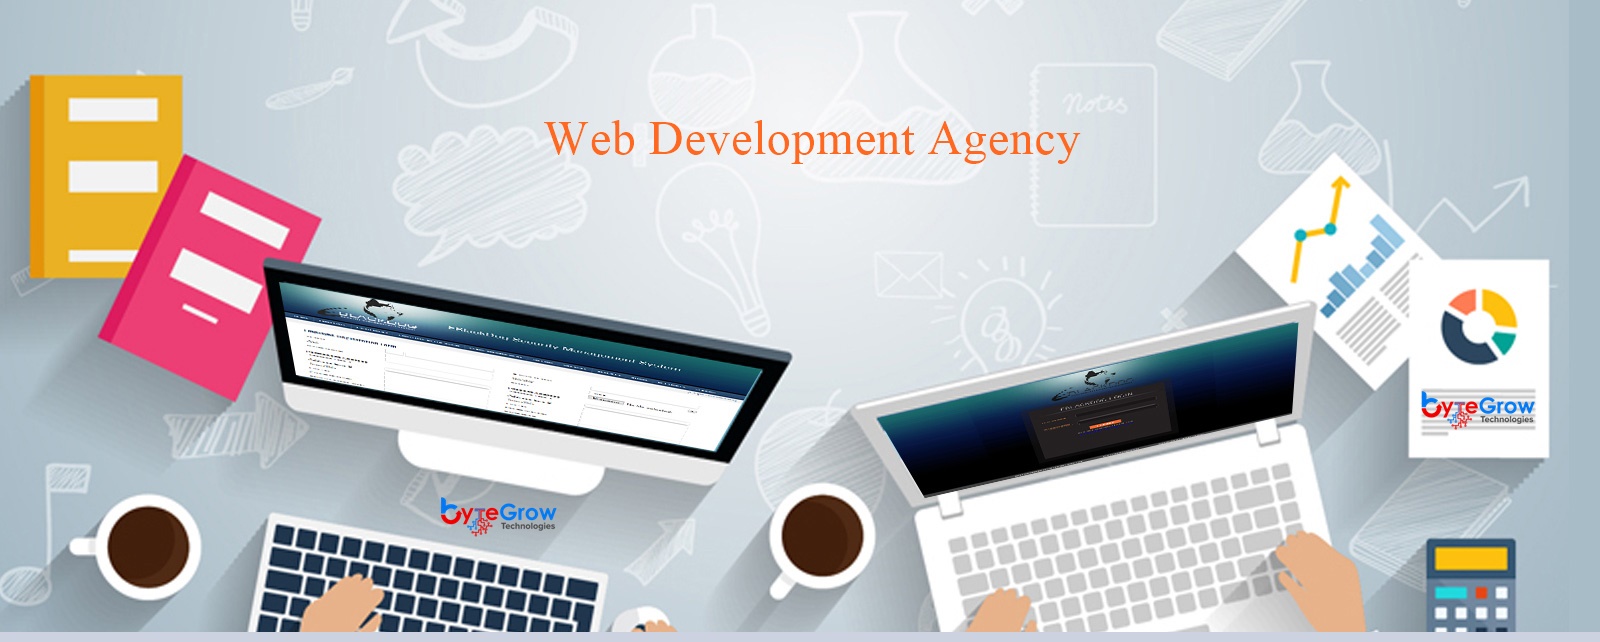 Things to Consider While Choosing a Web Development Agency